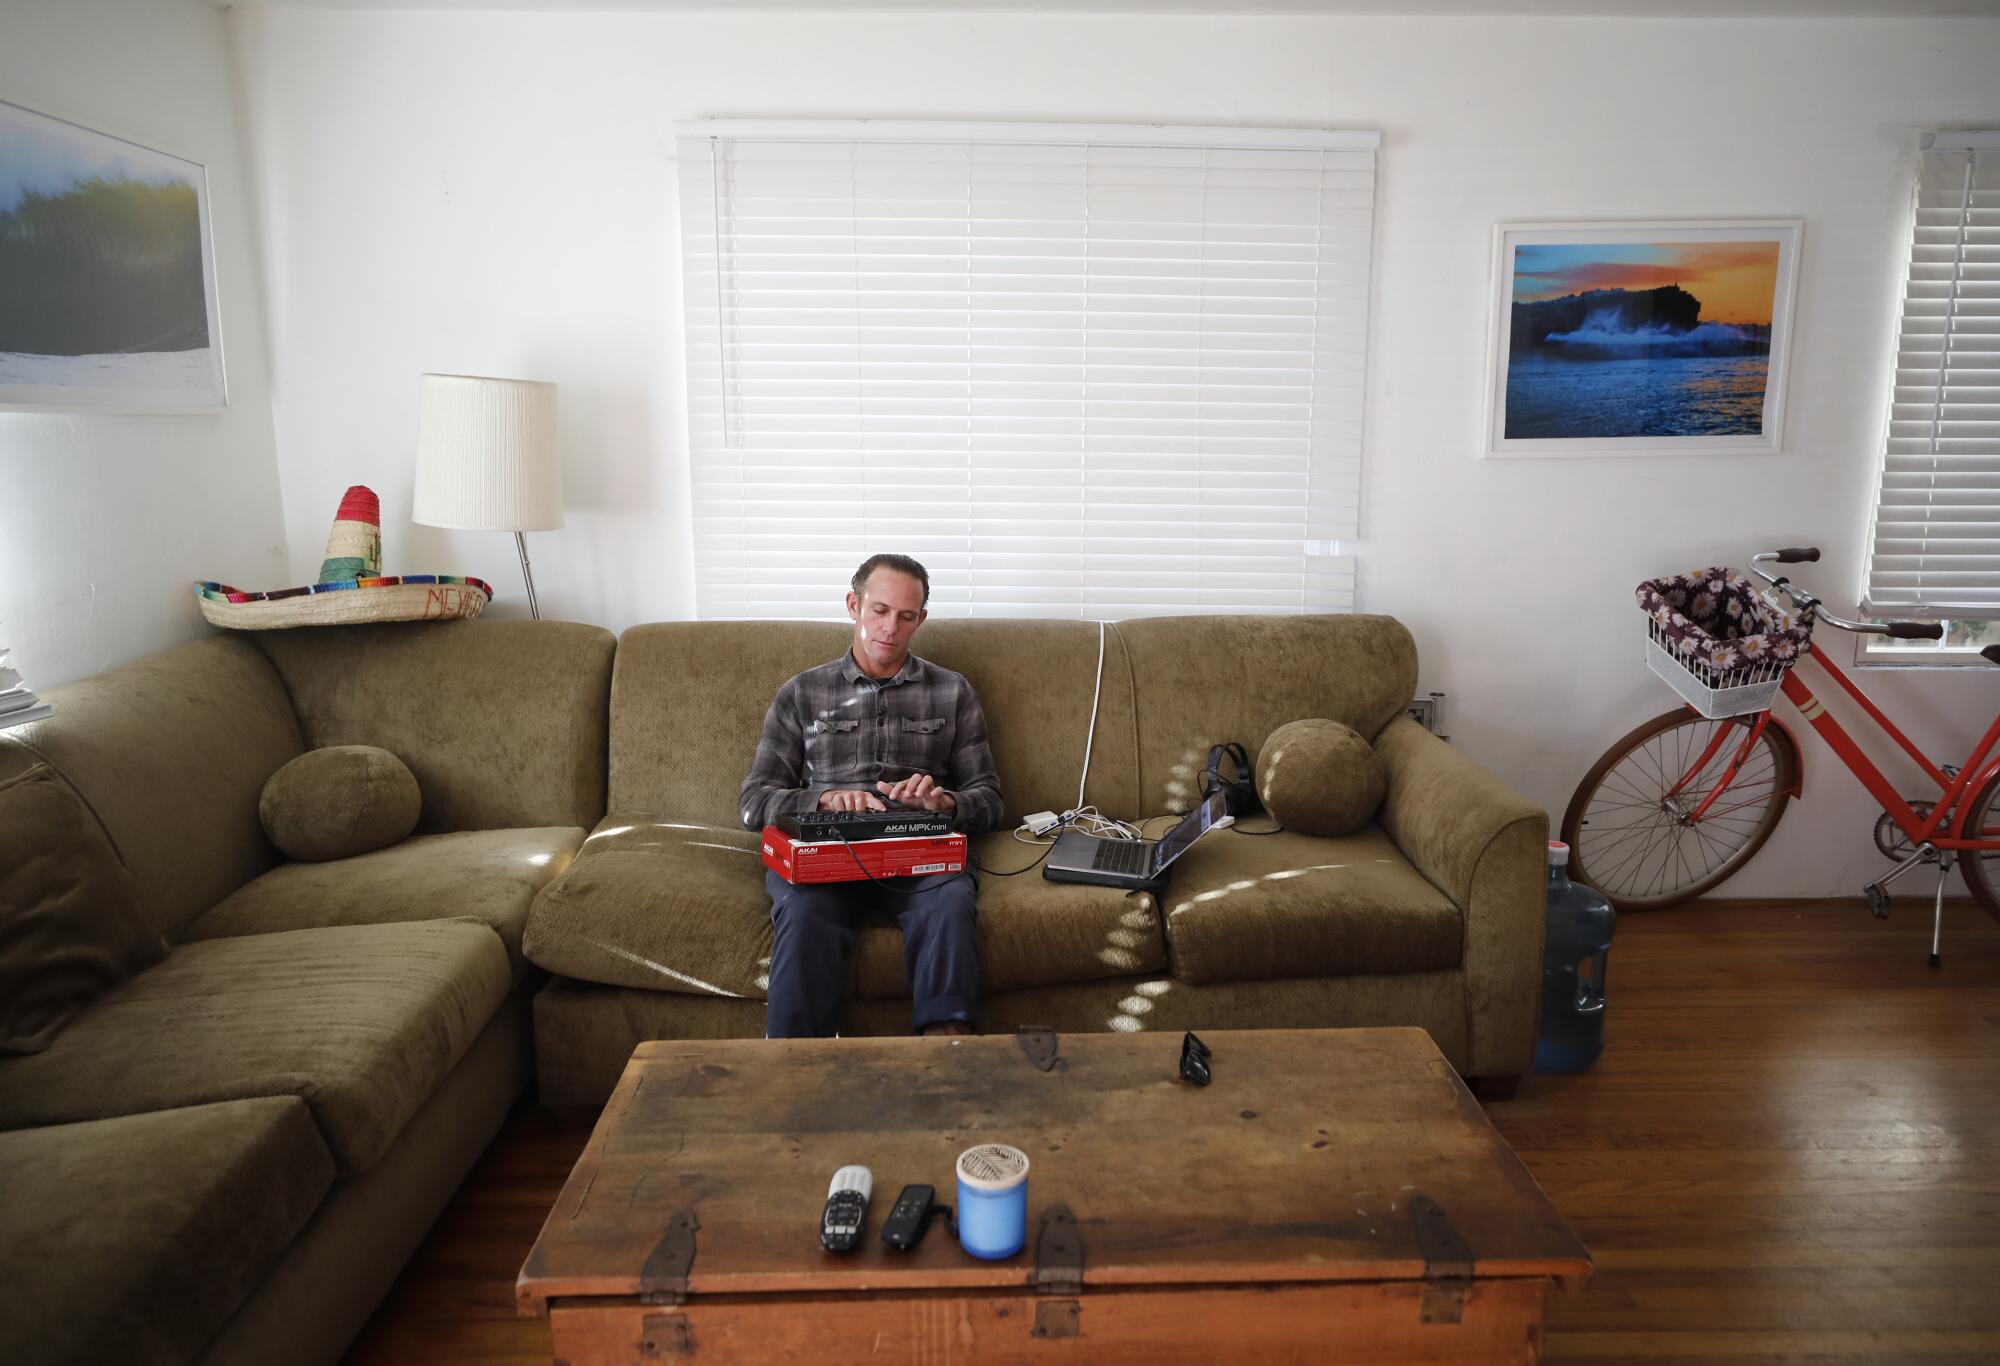 A man sits on a couch, playing a keyboard plugged into a laptop